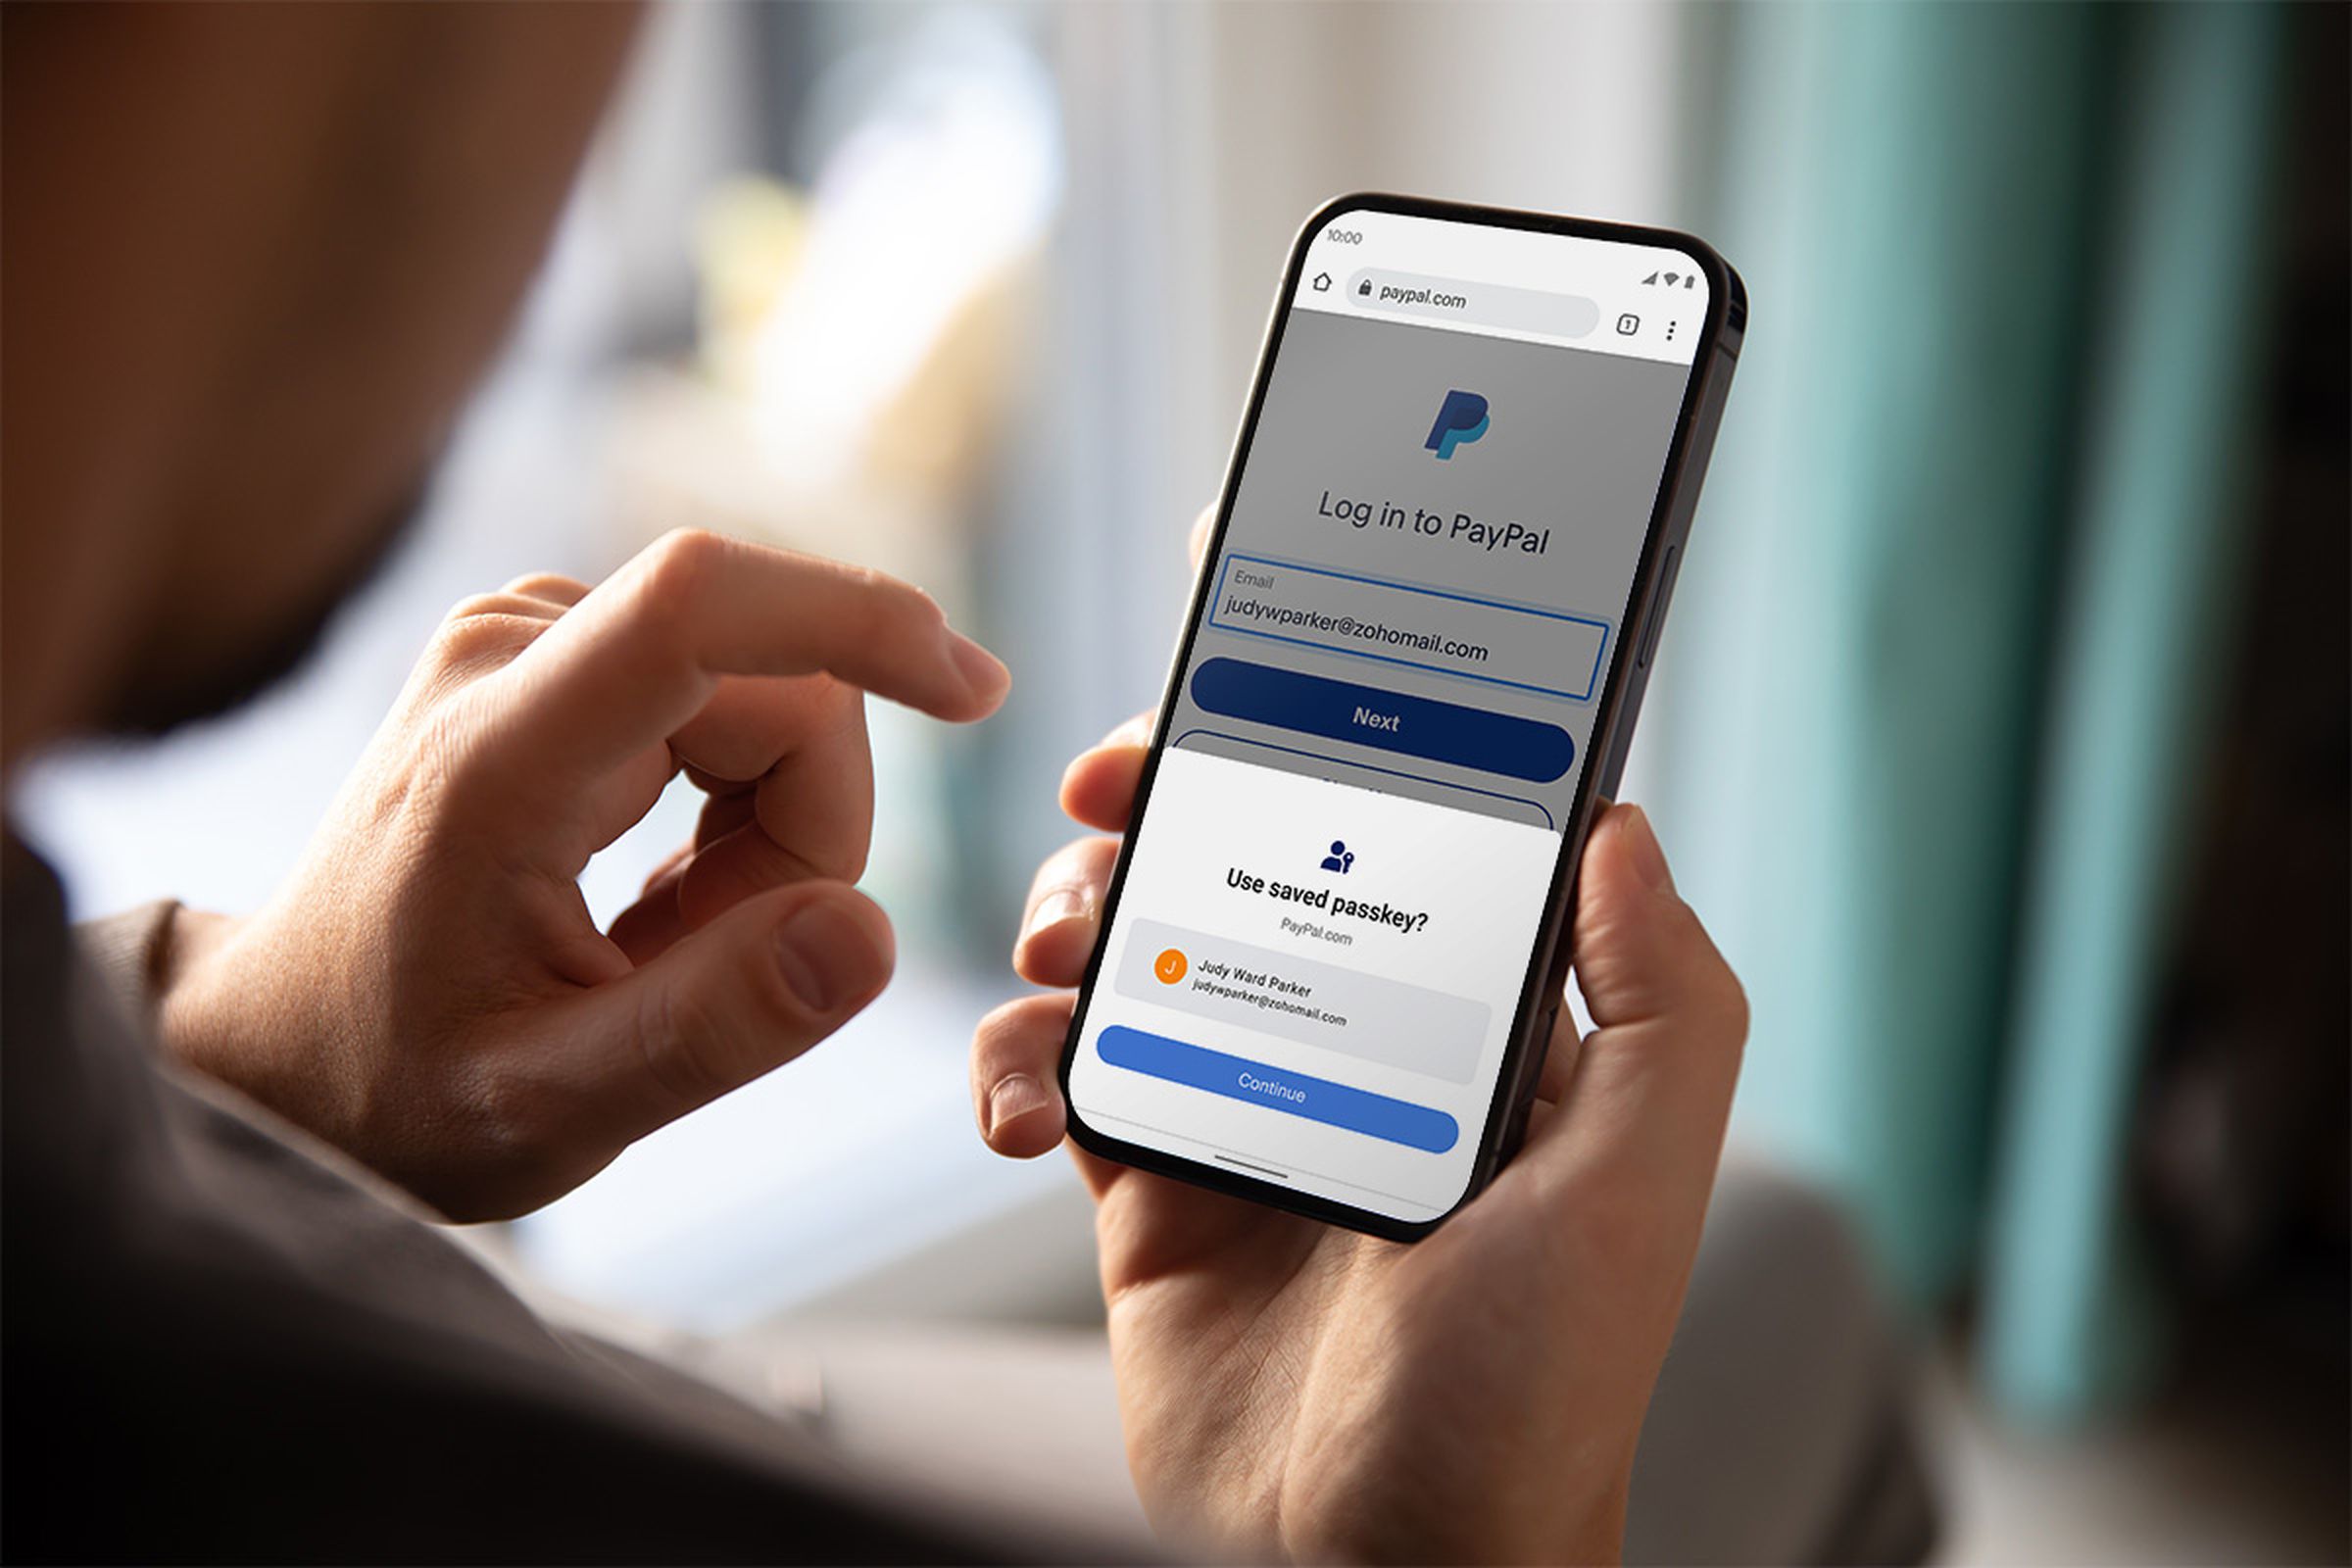 Photo of someone using a phone to log into PayPal with a passkey